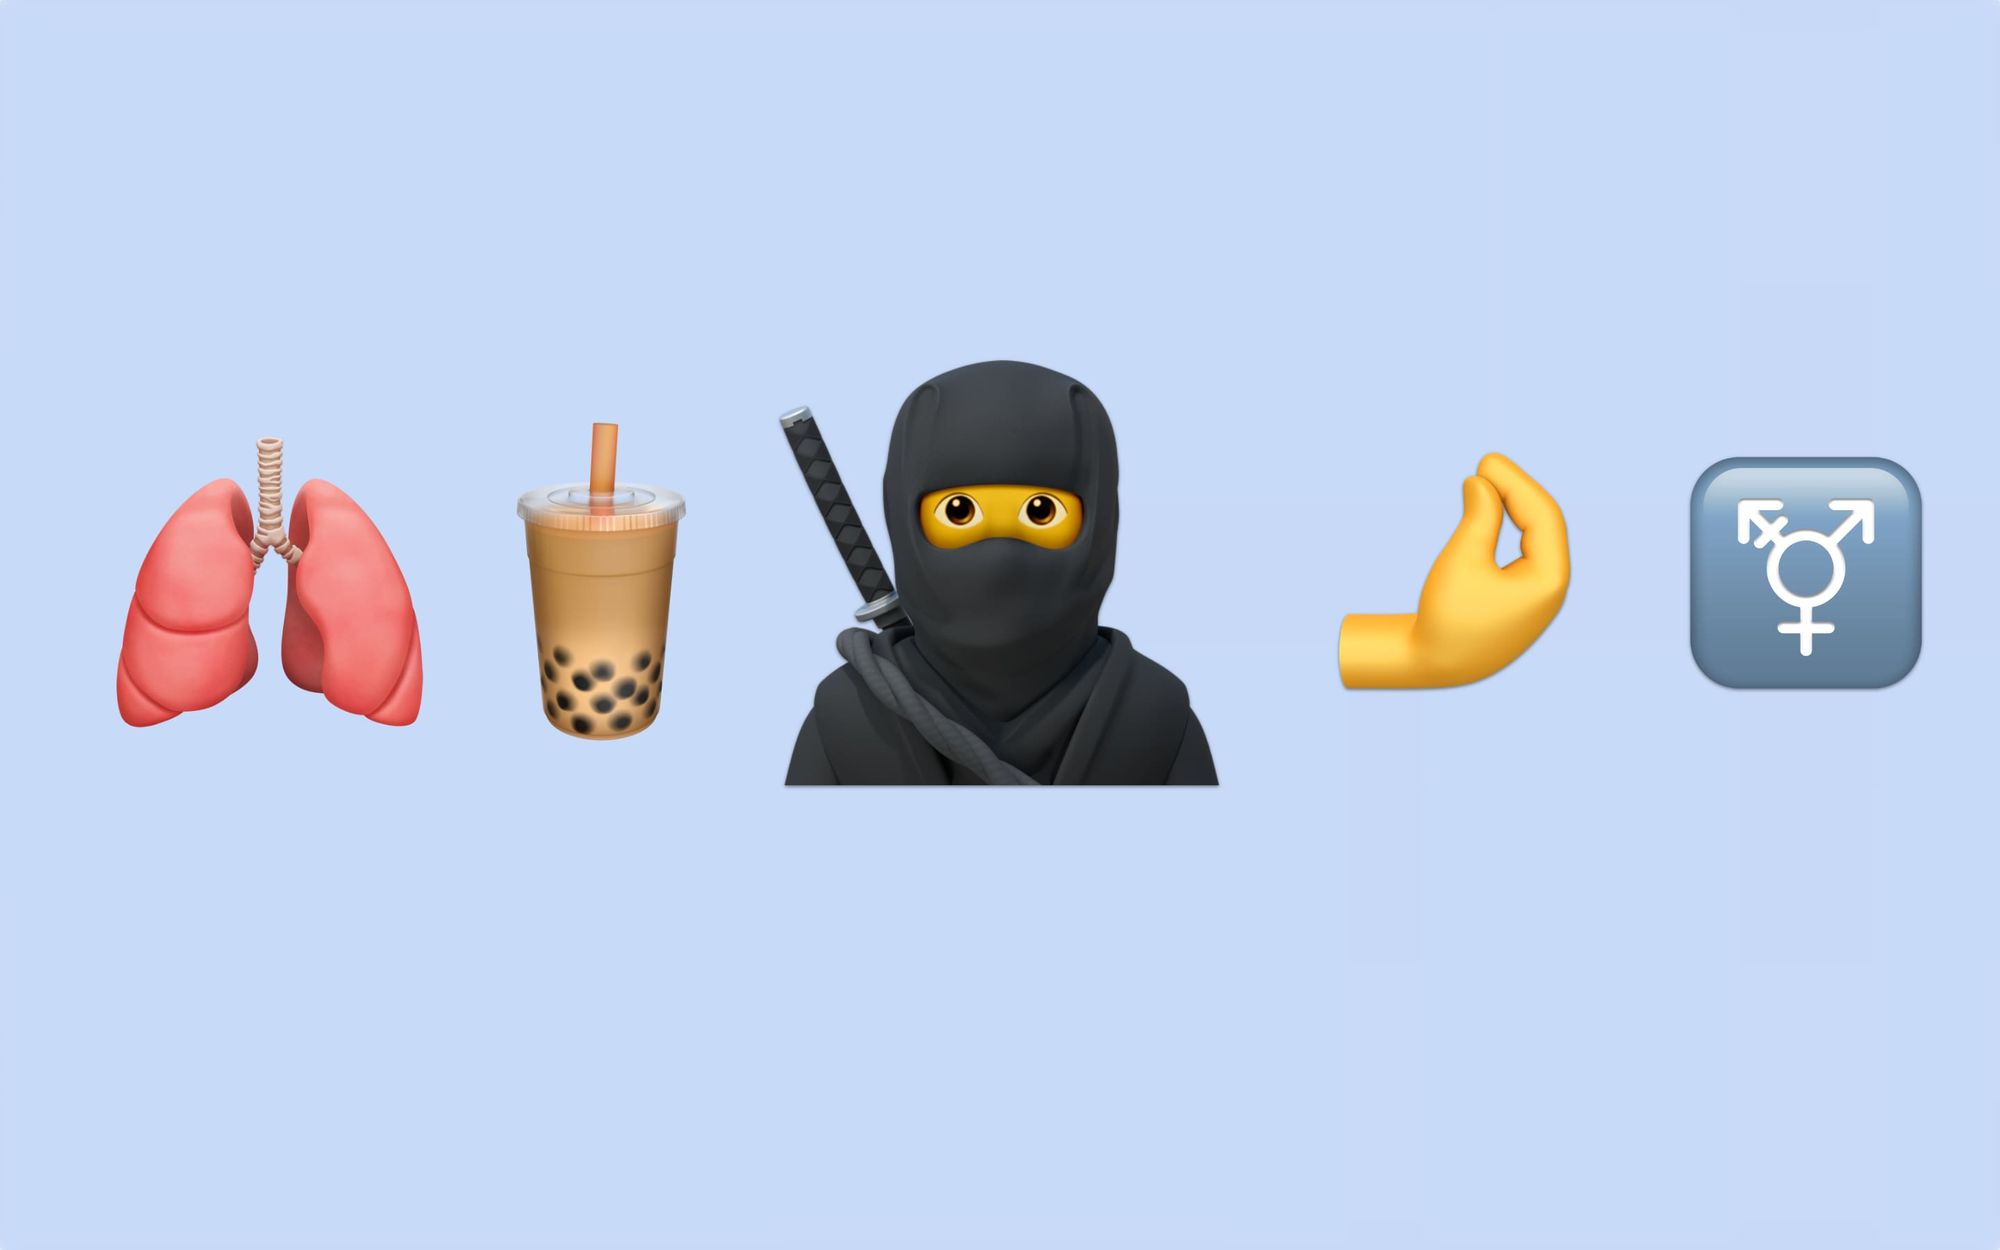 First Look: New Emojis Coming to iOS in 2020